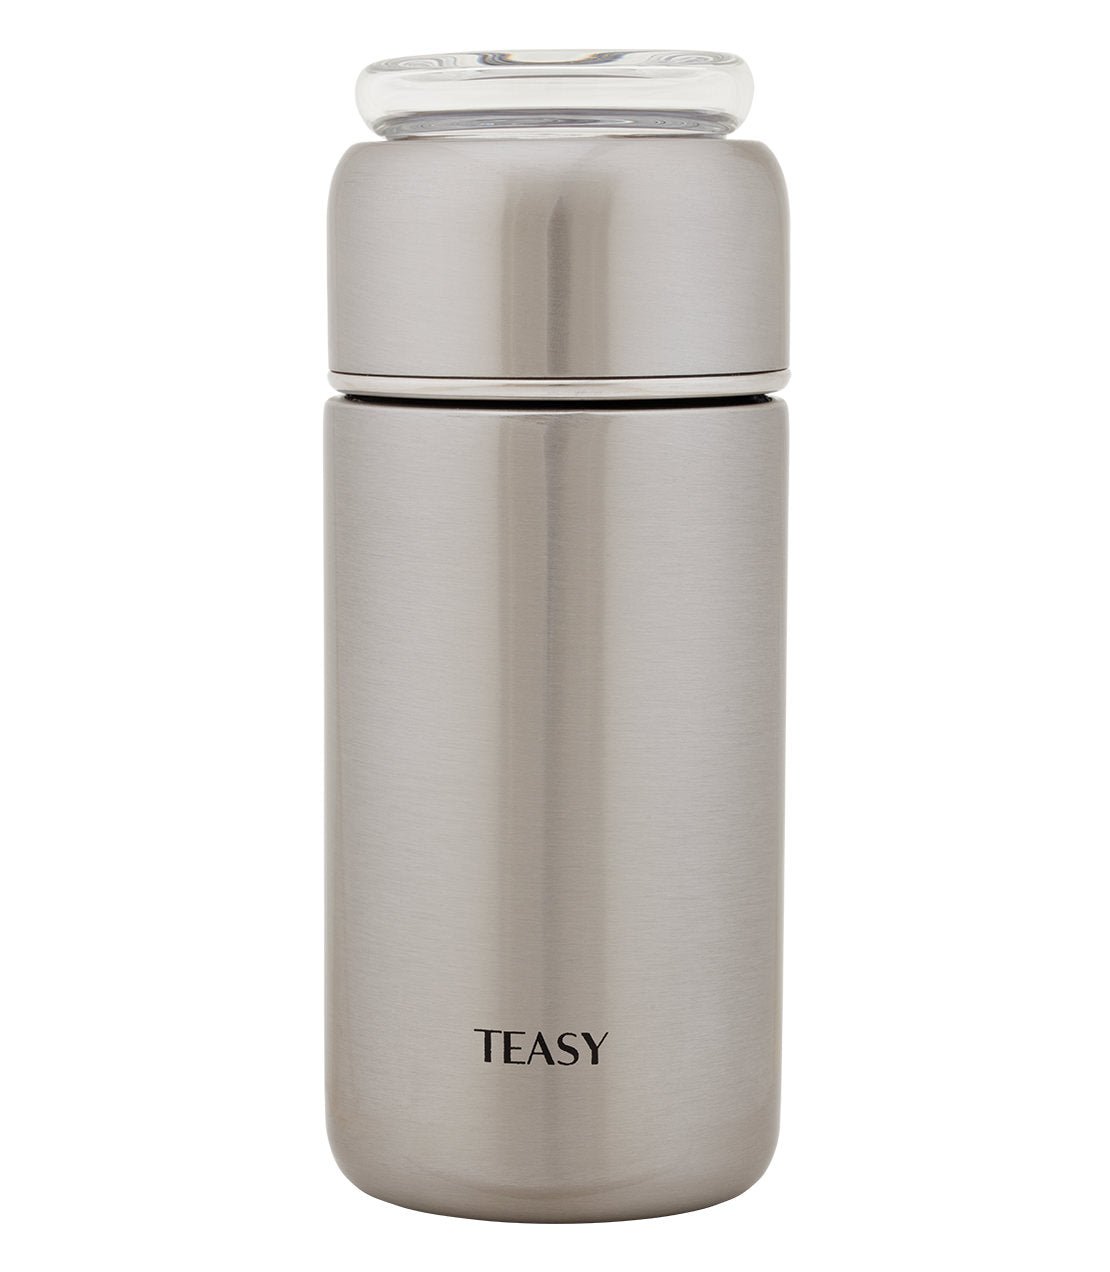 Teasy Insulated Flask (Multiple Colors) - 9 oz. Brushed Steel - Harney & Sons Fine Teas